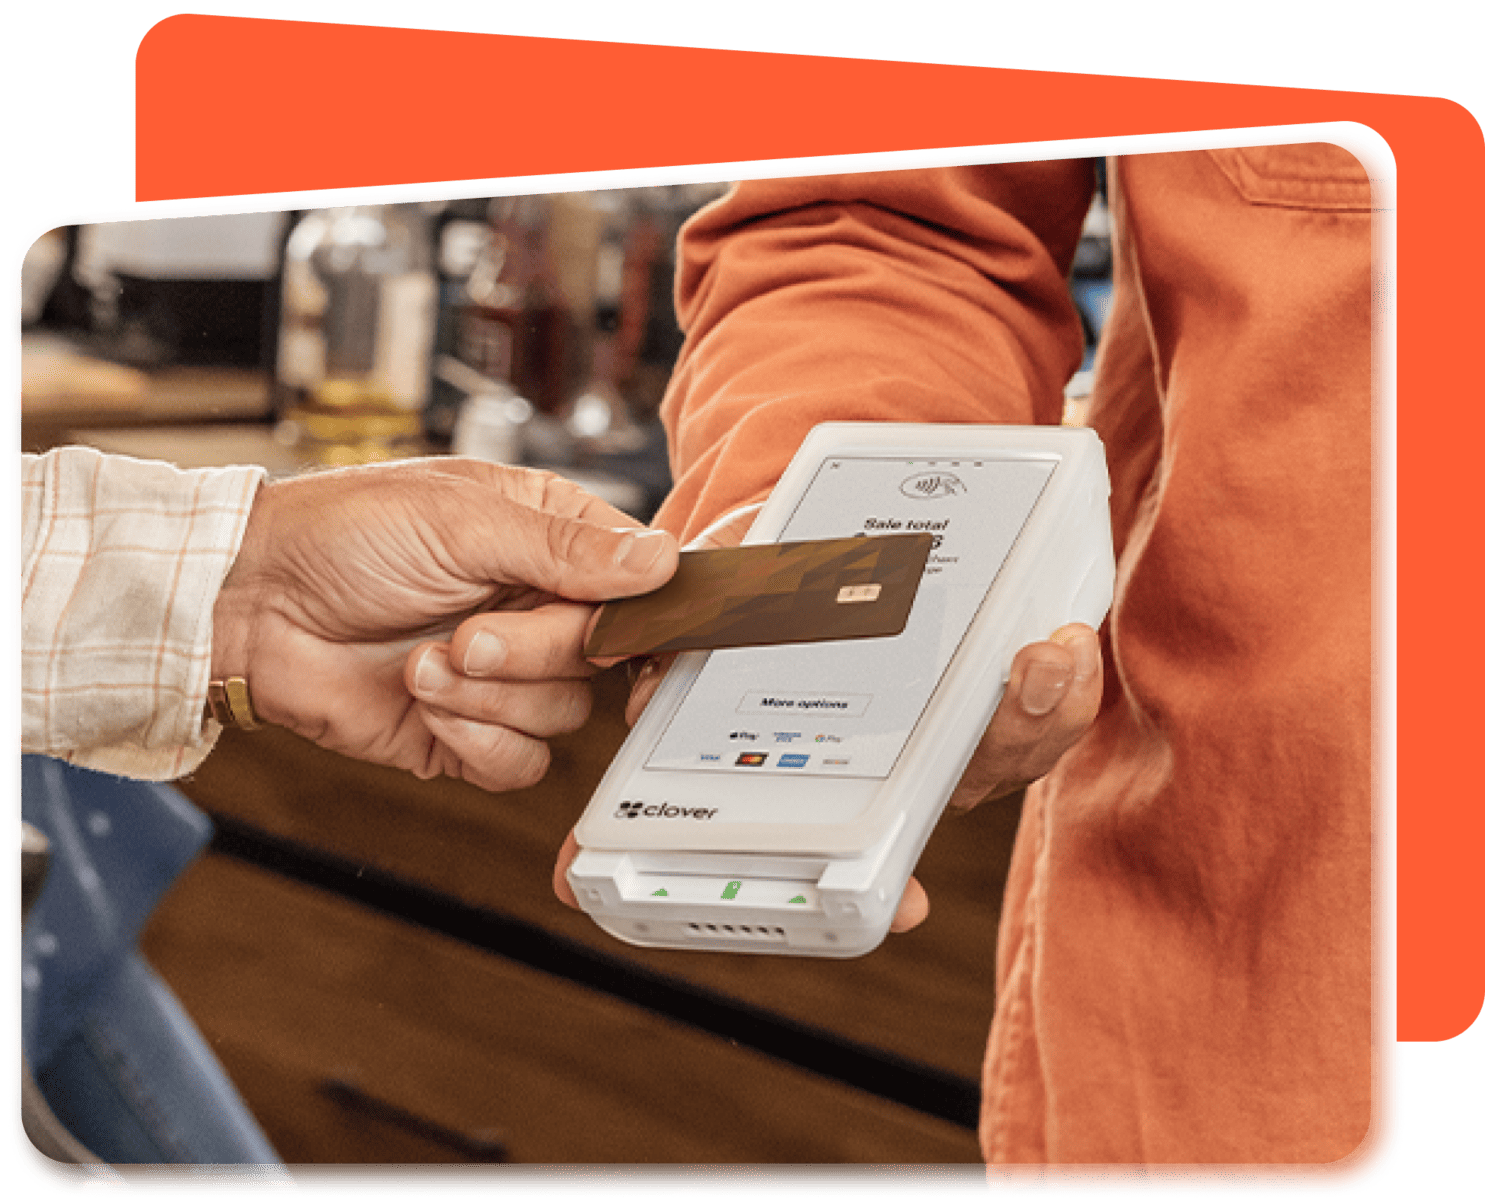 CardFree handheld mobile pos for quick service restaurants